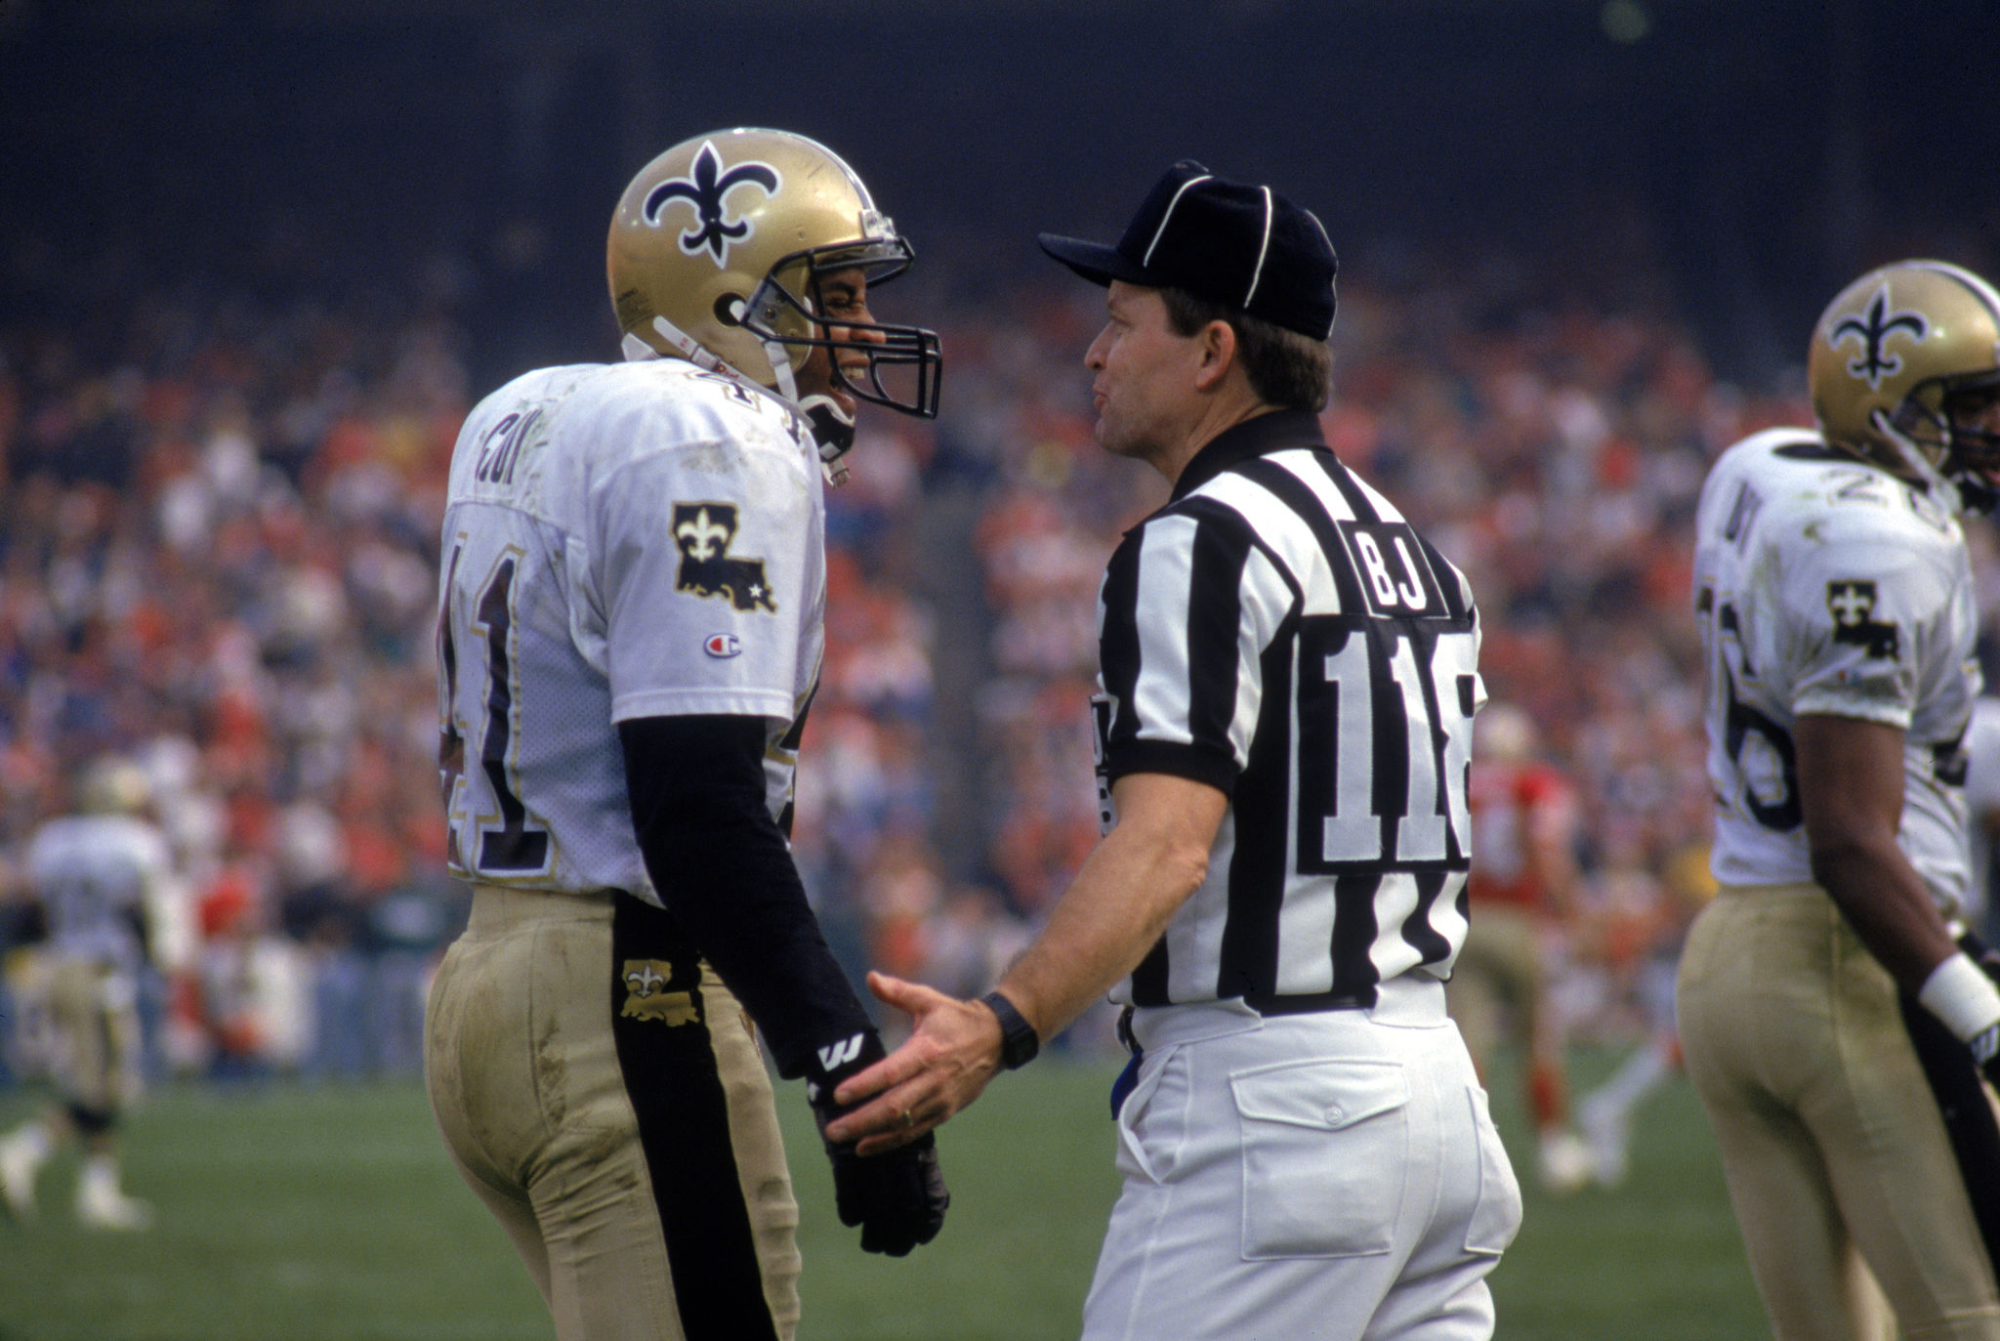 Back judge Tom Sifferman converses with New Orleans Saints cornerback Toi Cook.